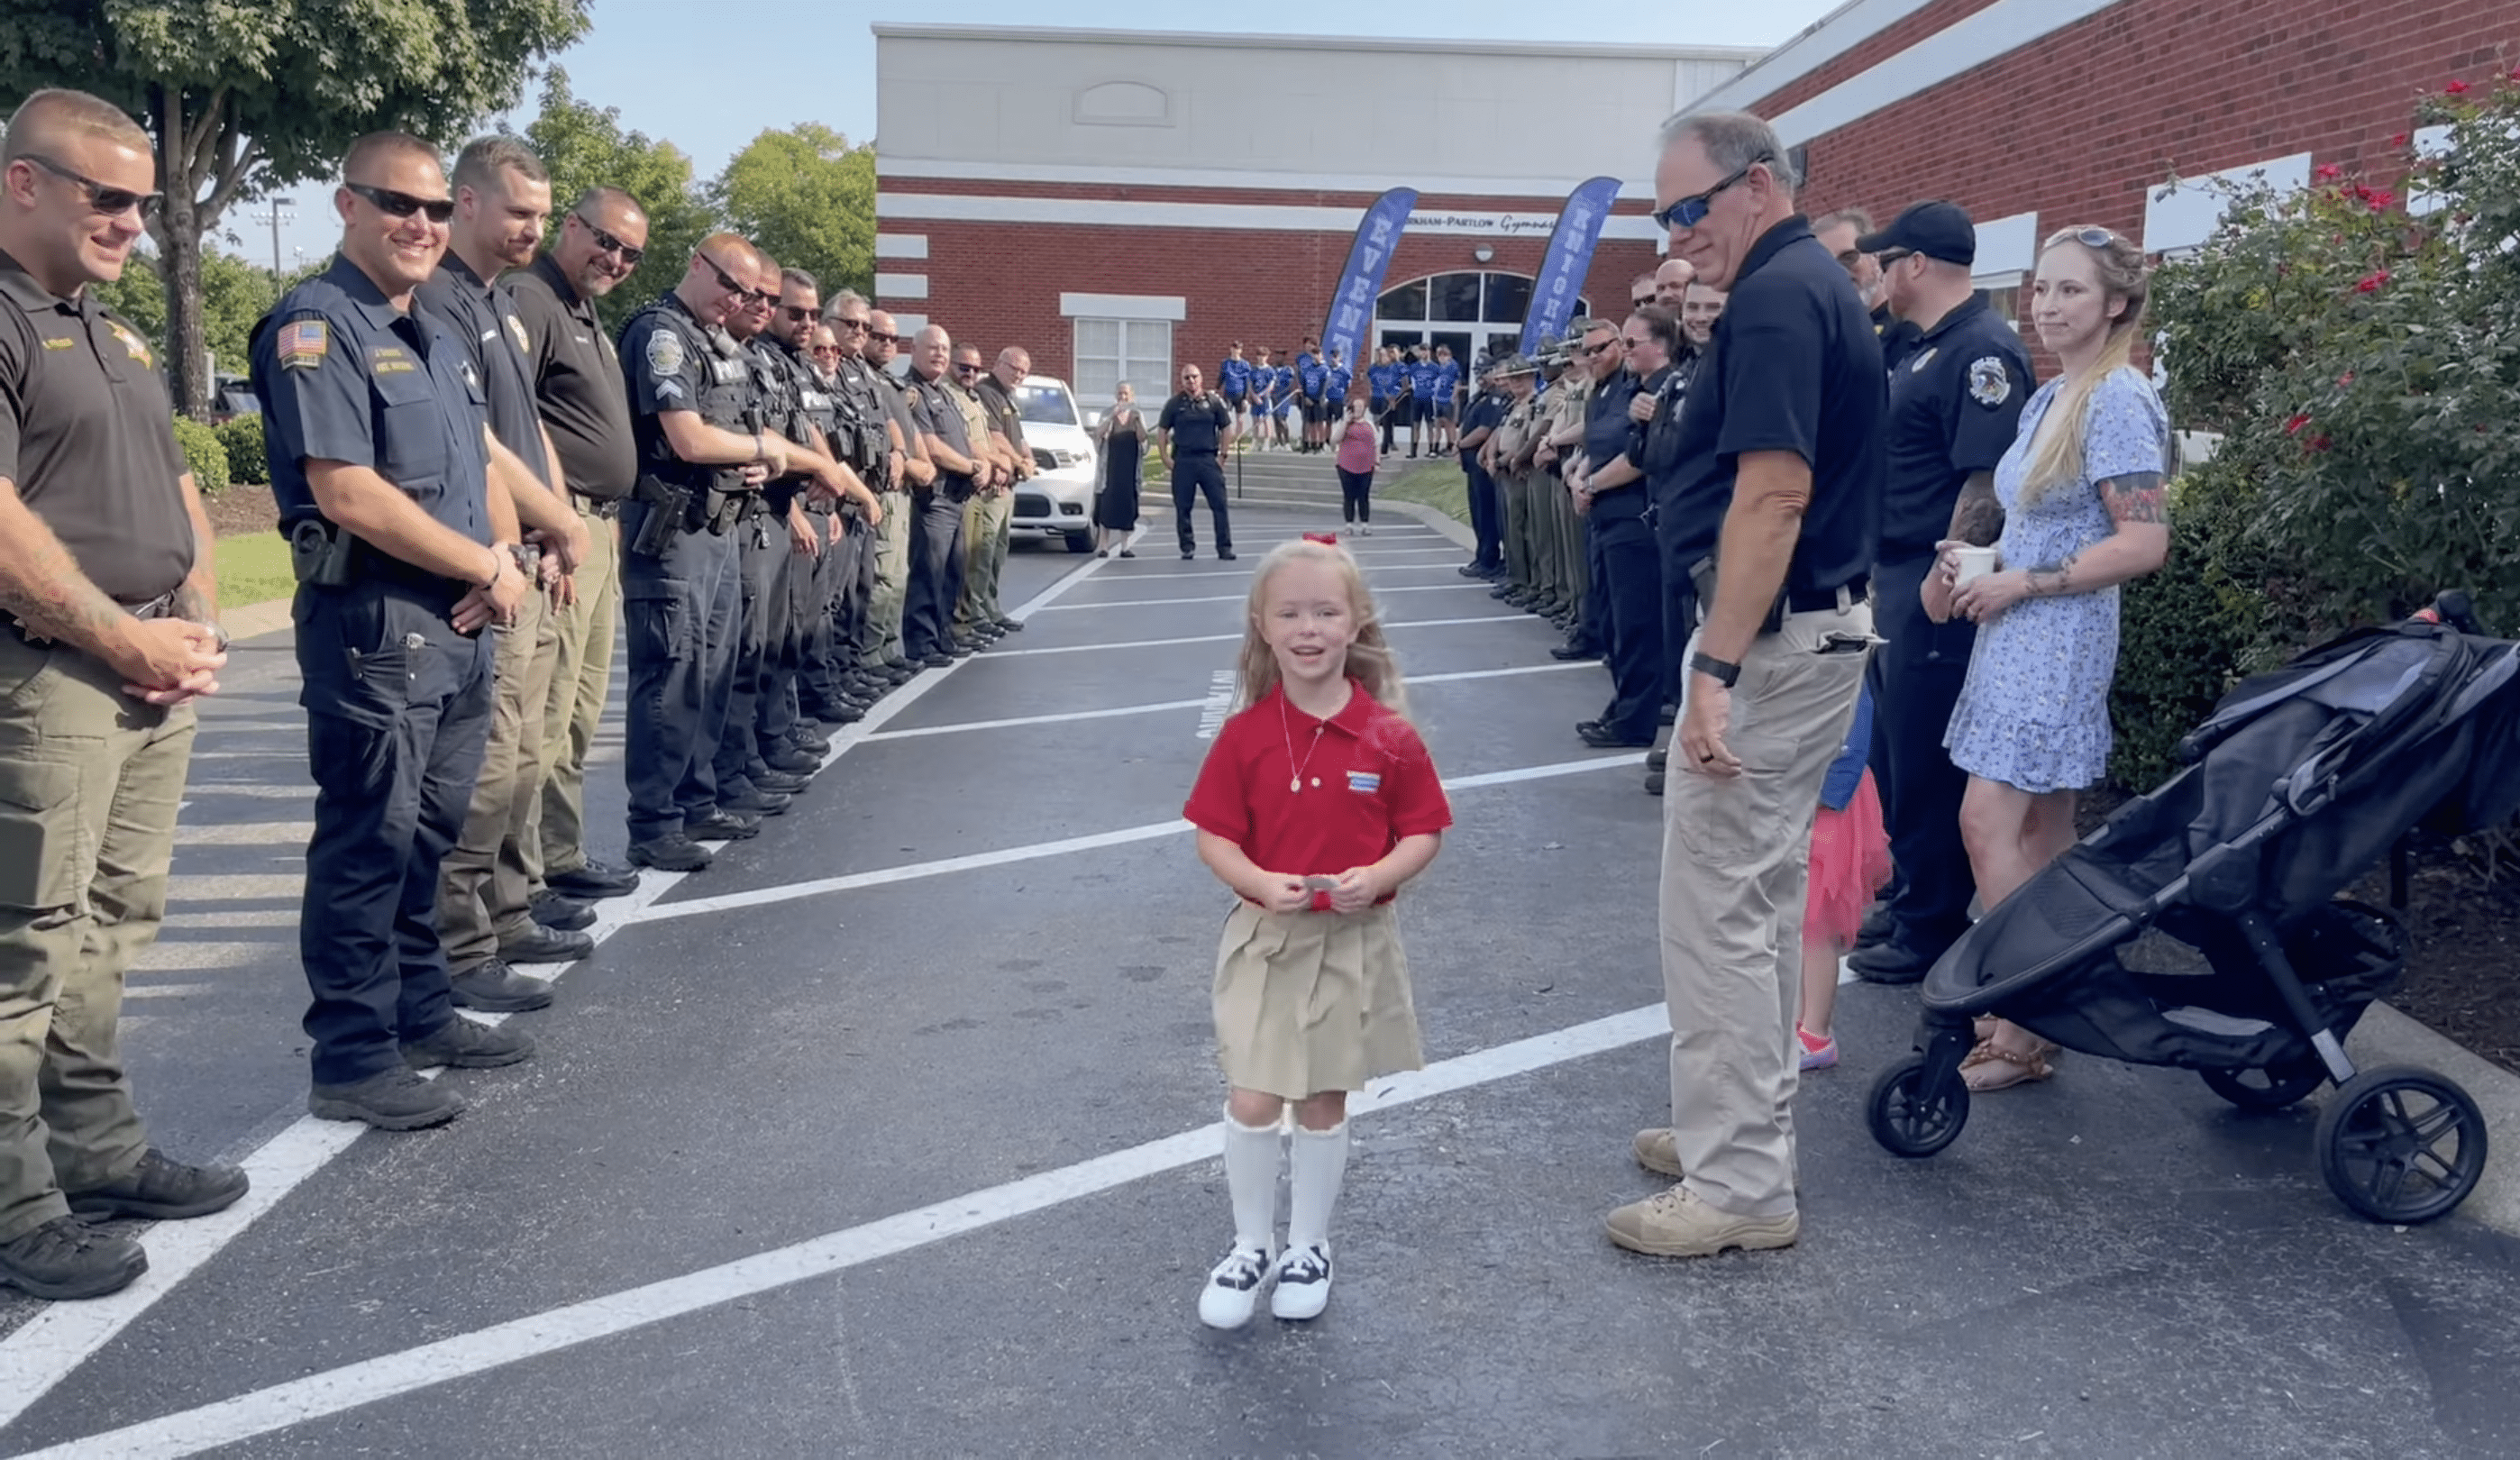 Cops lining both sides of a parking lot with Anna walking in the middle. | Source: Facebook.com/La Vergne Police Department